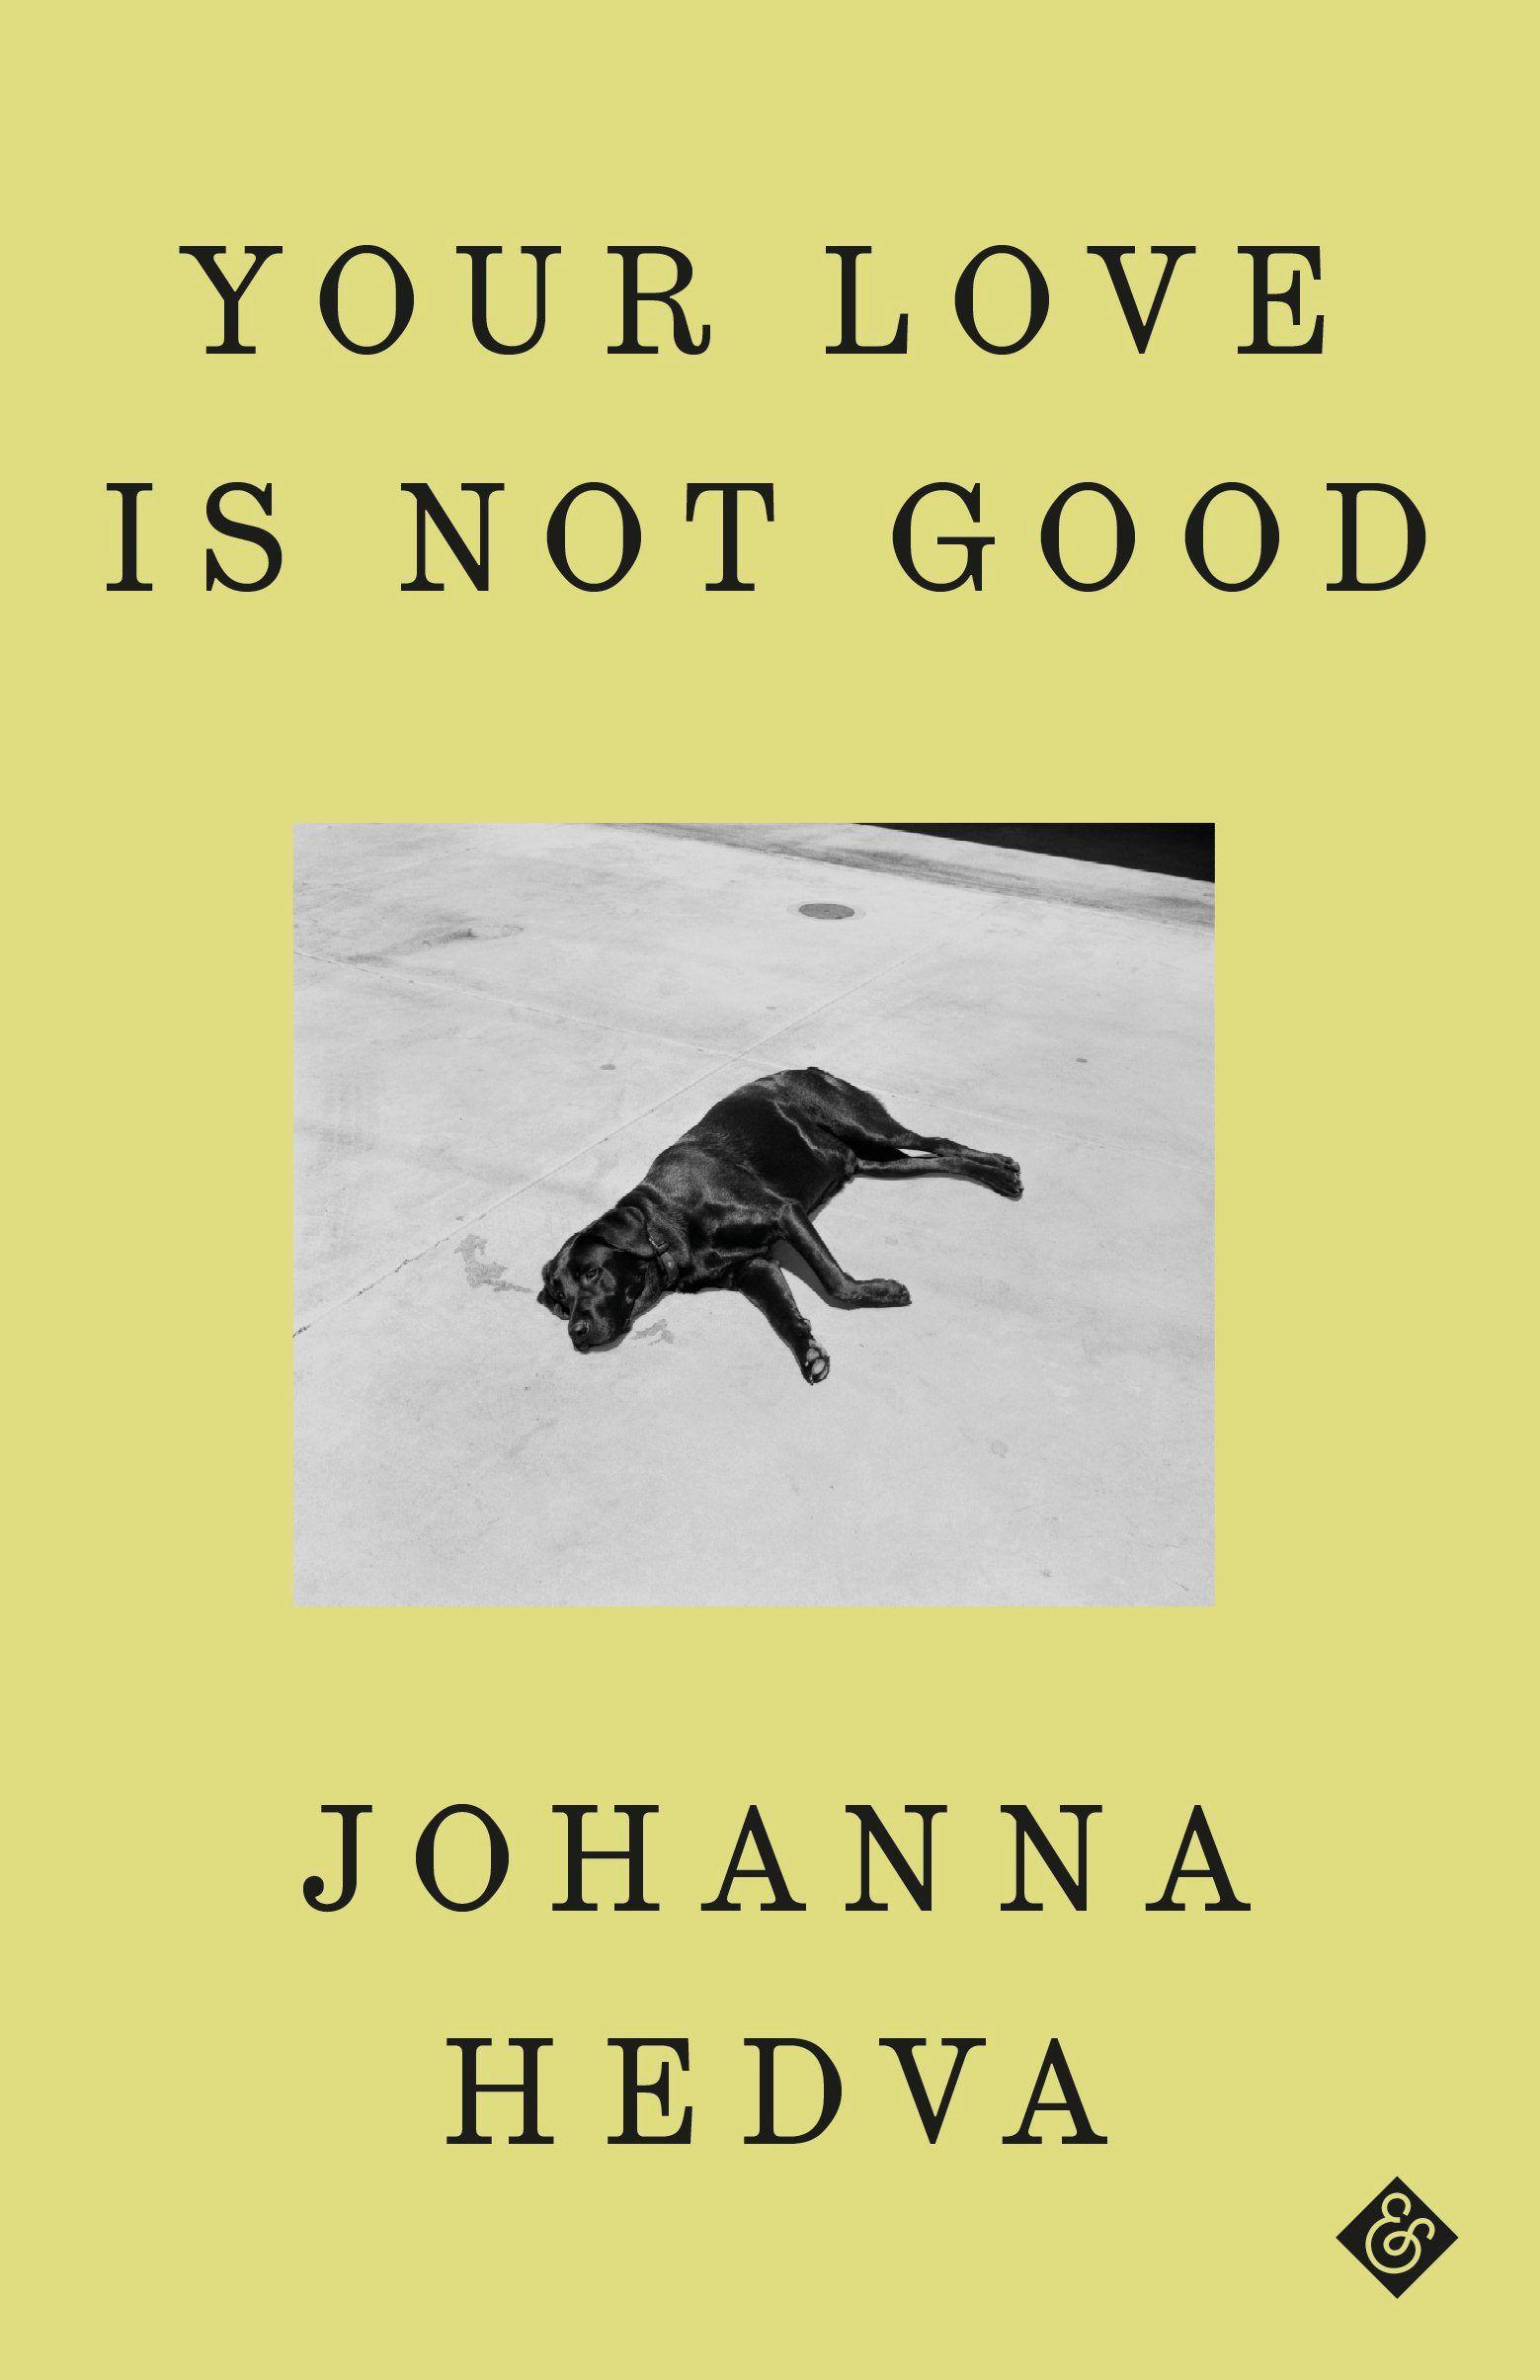 A book jacket that is a sickly yellow color. On it is written the title of the novel, "YOUR LOVE IS NOT GOOD," and the author's name, JOHANNA HEDVA. In the center, there is a black and white photograph of a dog lying on its side on concrete, looking dead.